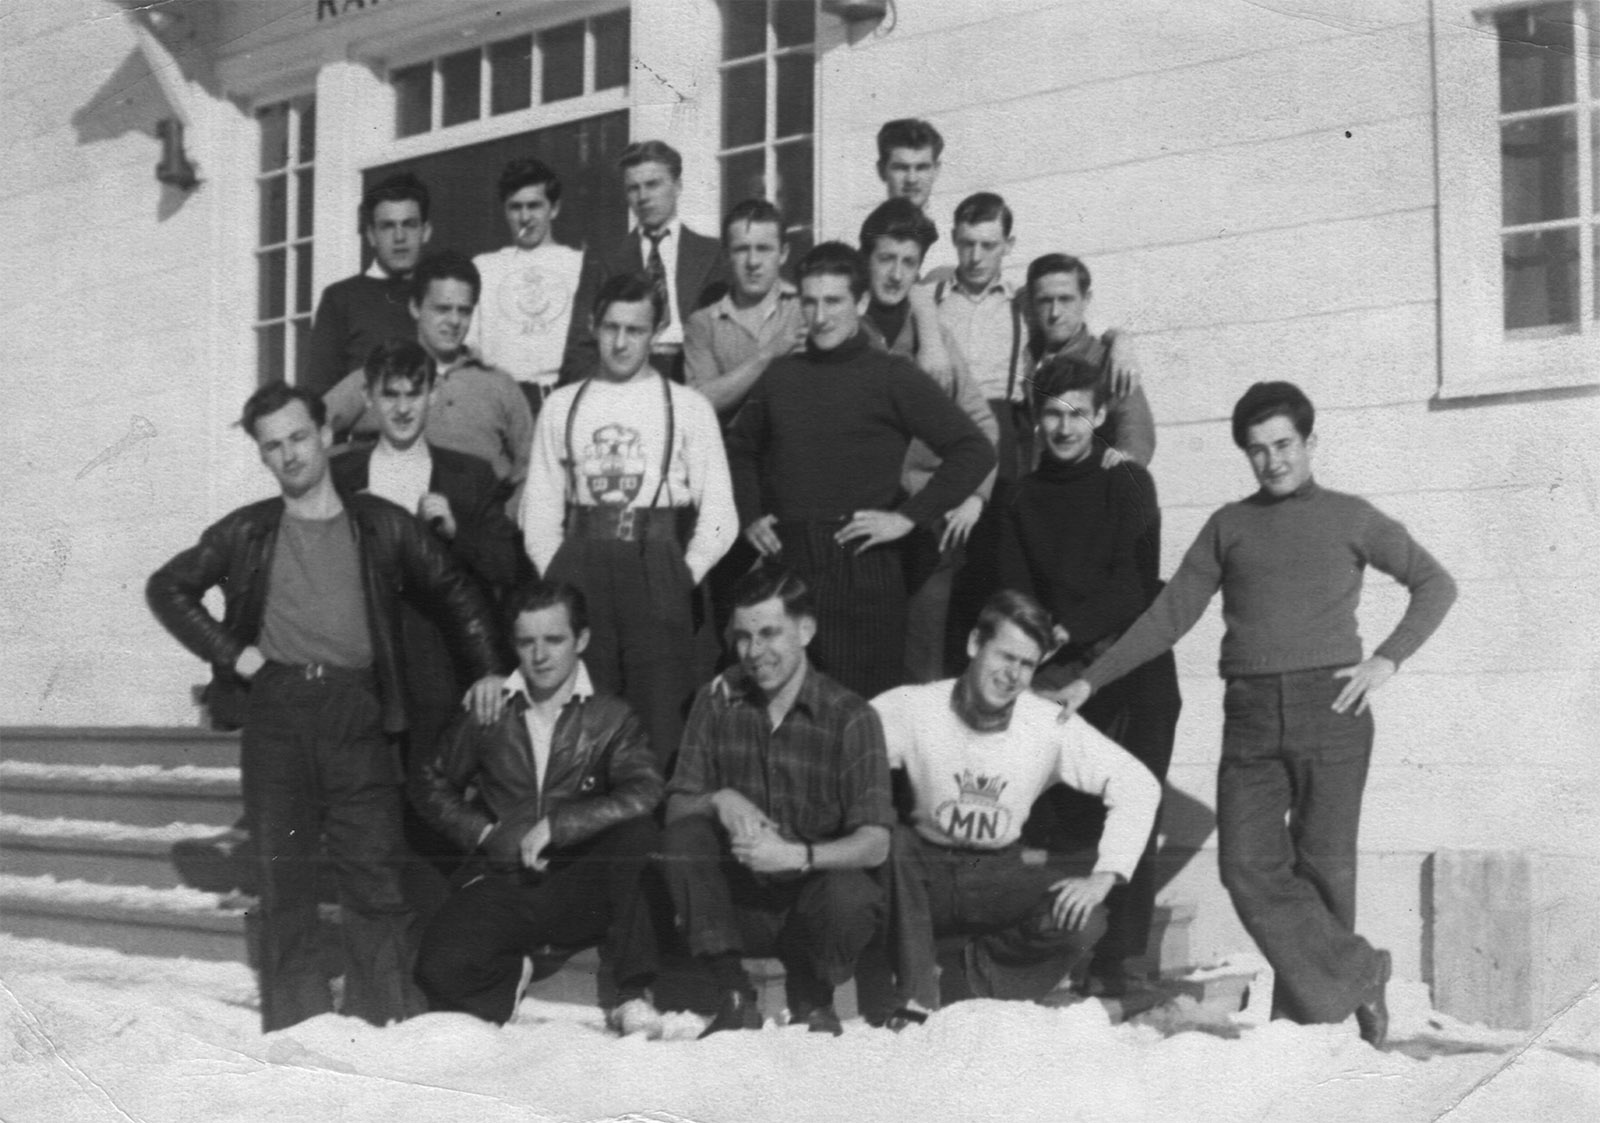 Crew members at St. Margaret’s Sea Training School (with Cadet Officer Wetherall in the upper right hand corner)